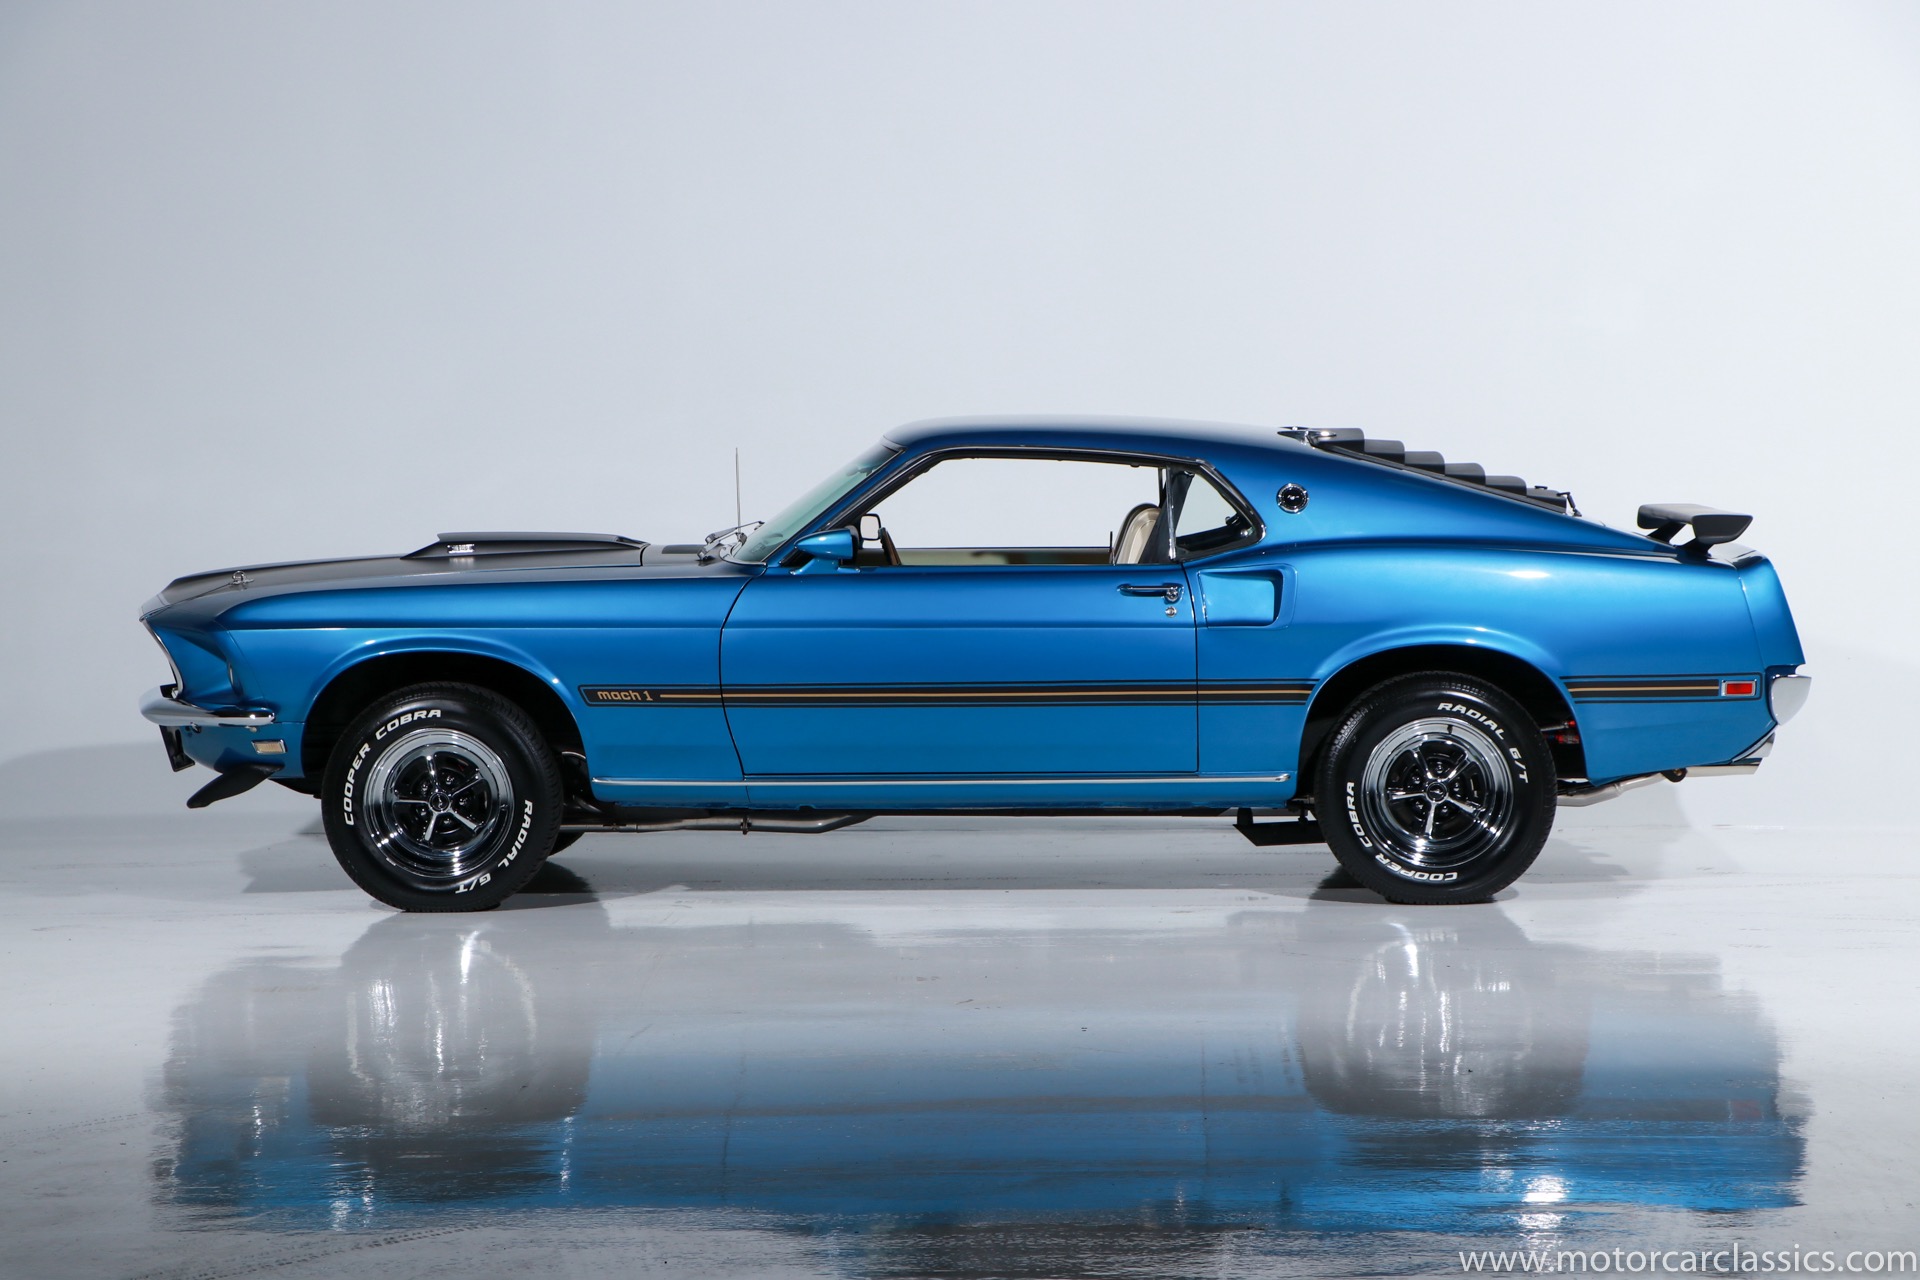 Used 1969 Ford Mustang Mach 1 For Sale ($89,900) | Motorcar Classics ...